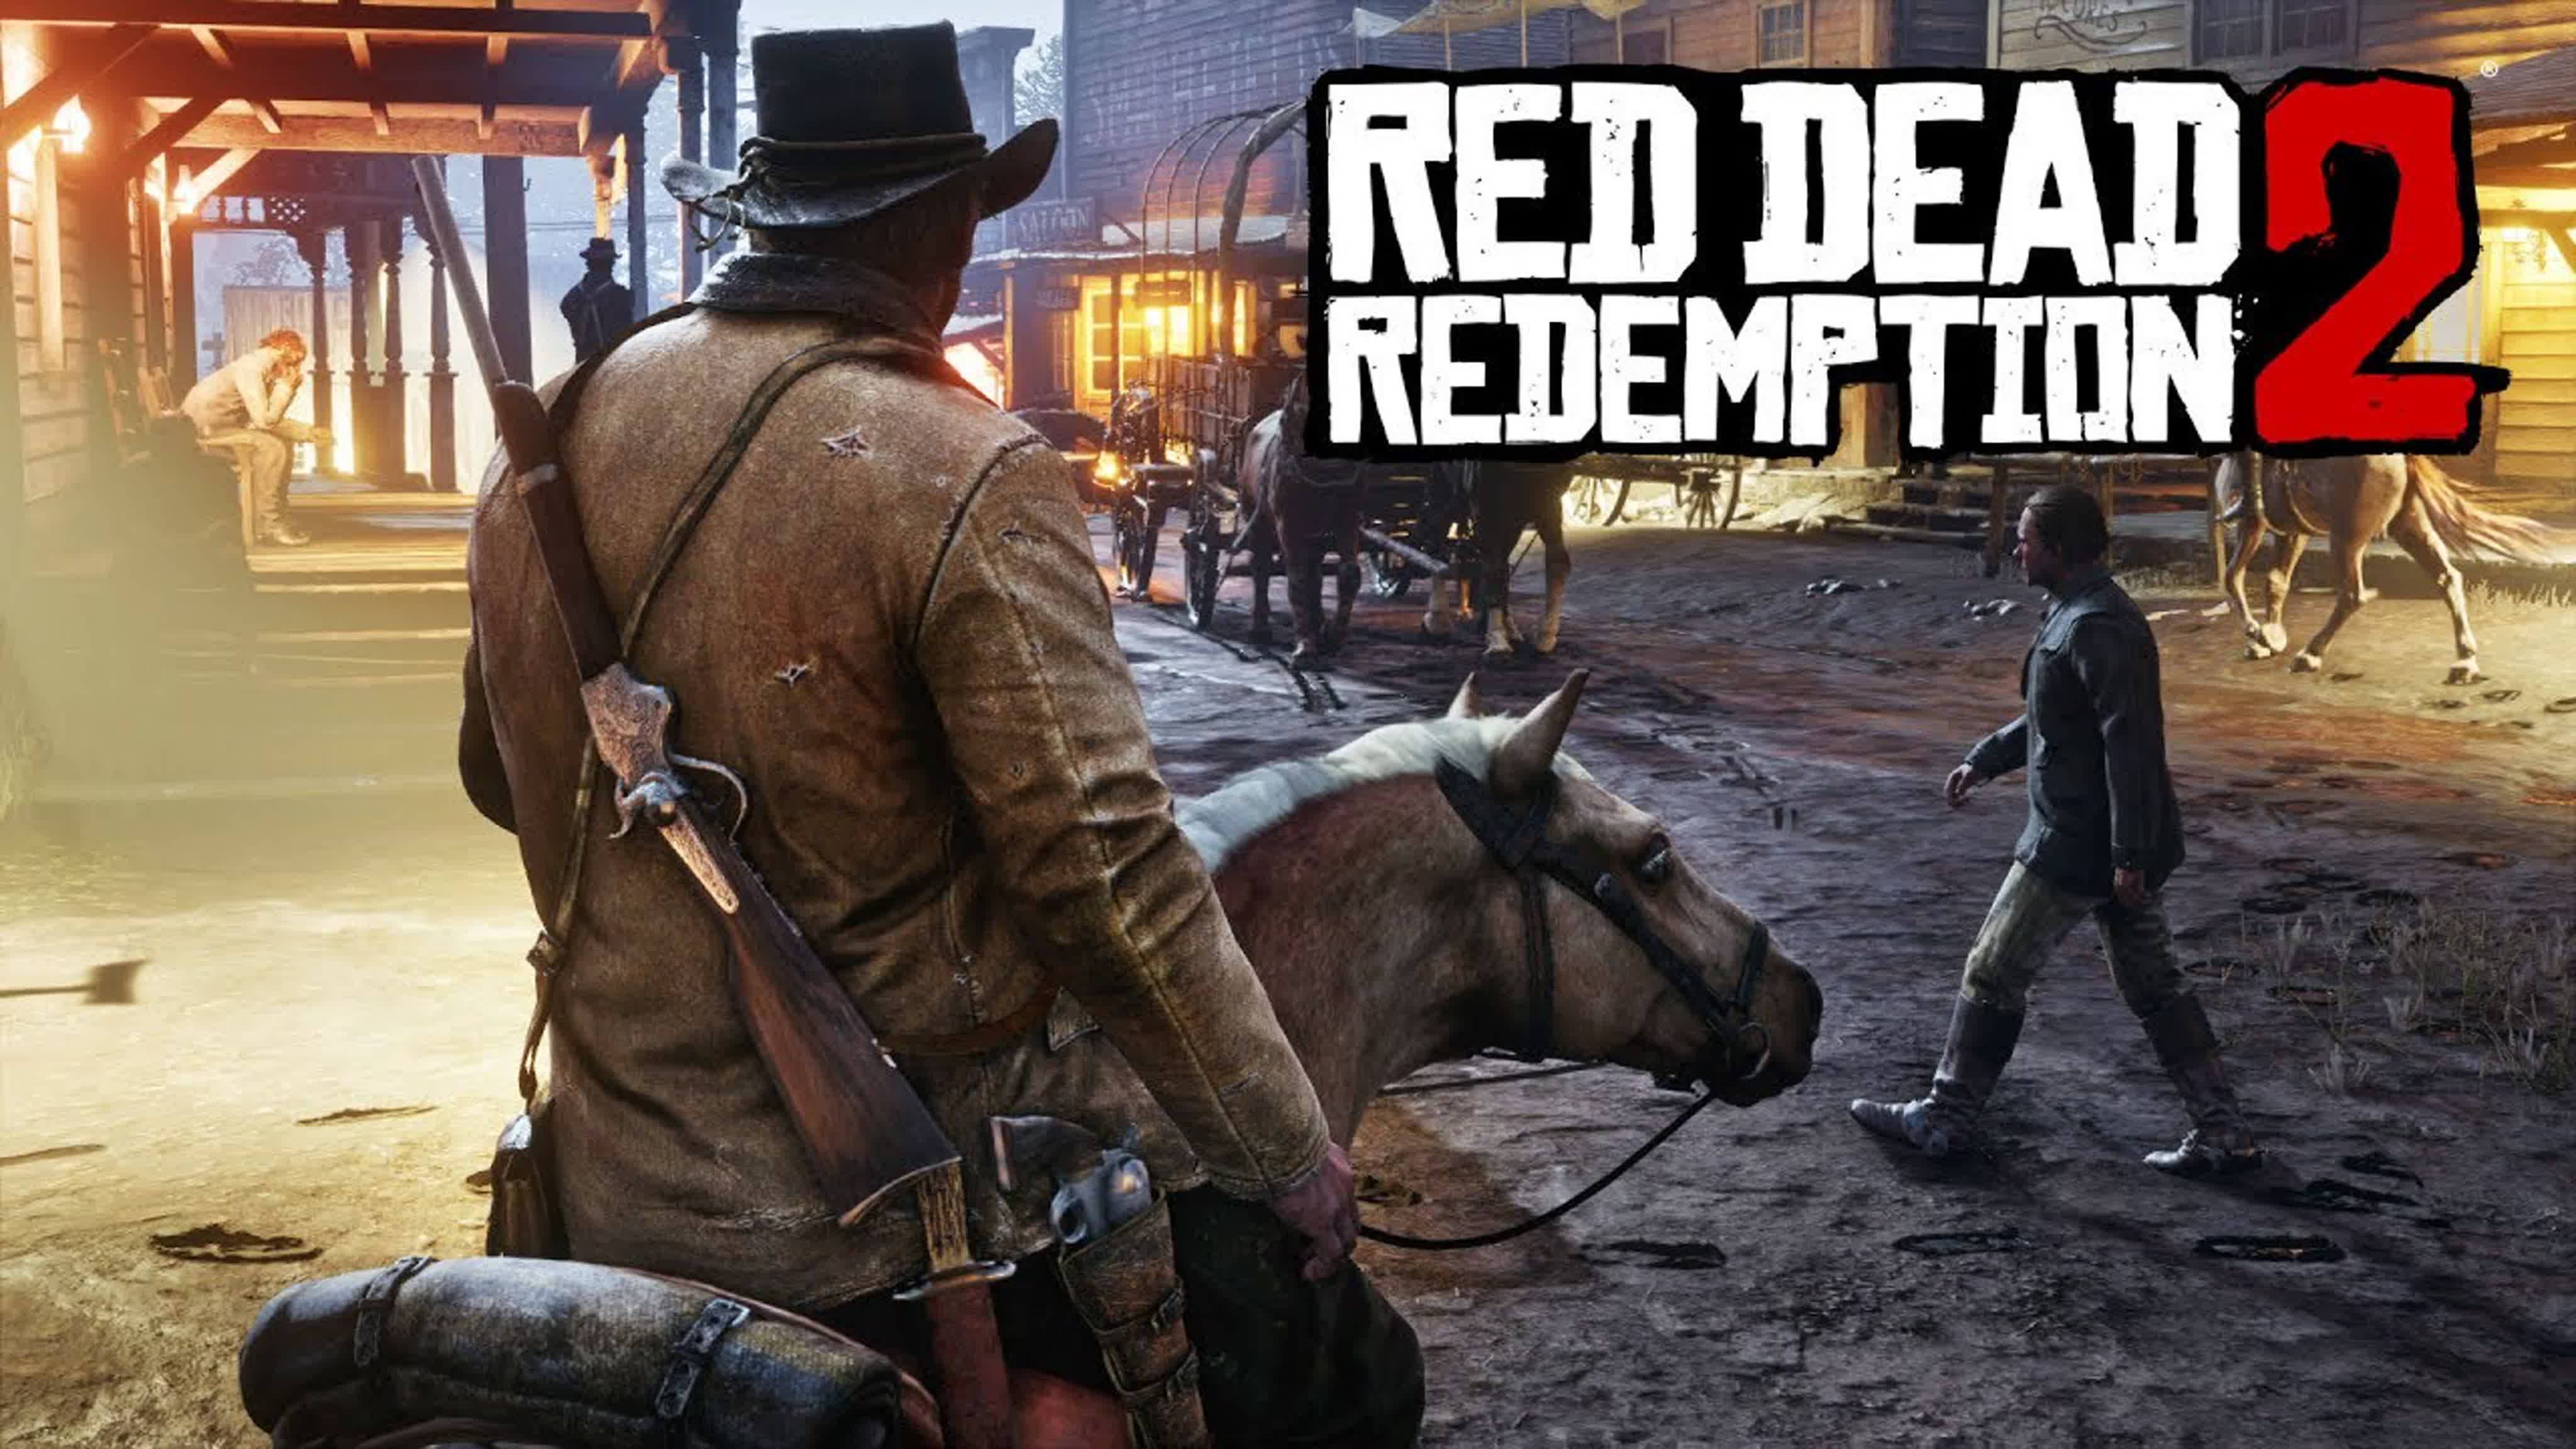 Игра red ps4. Rdr 2 ps4. Red Dead Redemption 2 на пс4. Ред дед редемпшен 2 ps4. Red Dead Redemption 2 стрим.